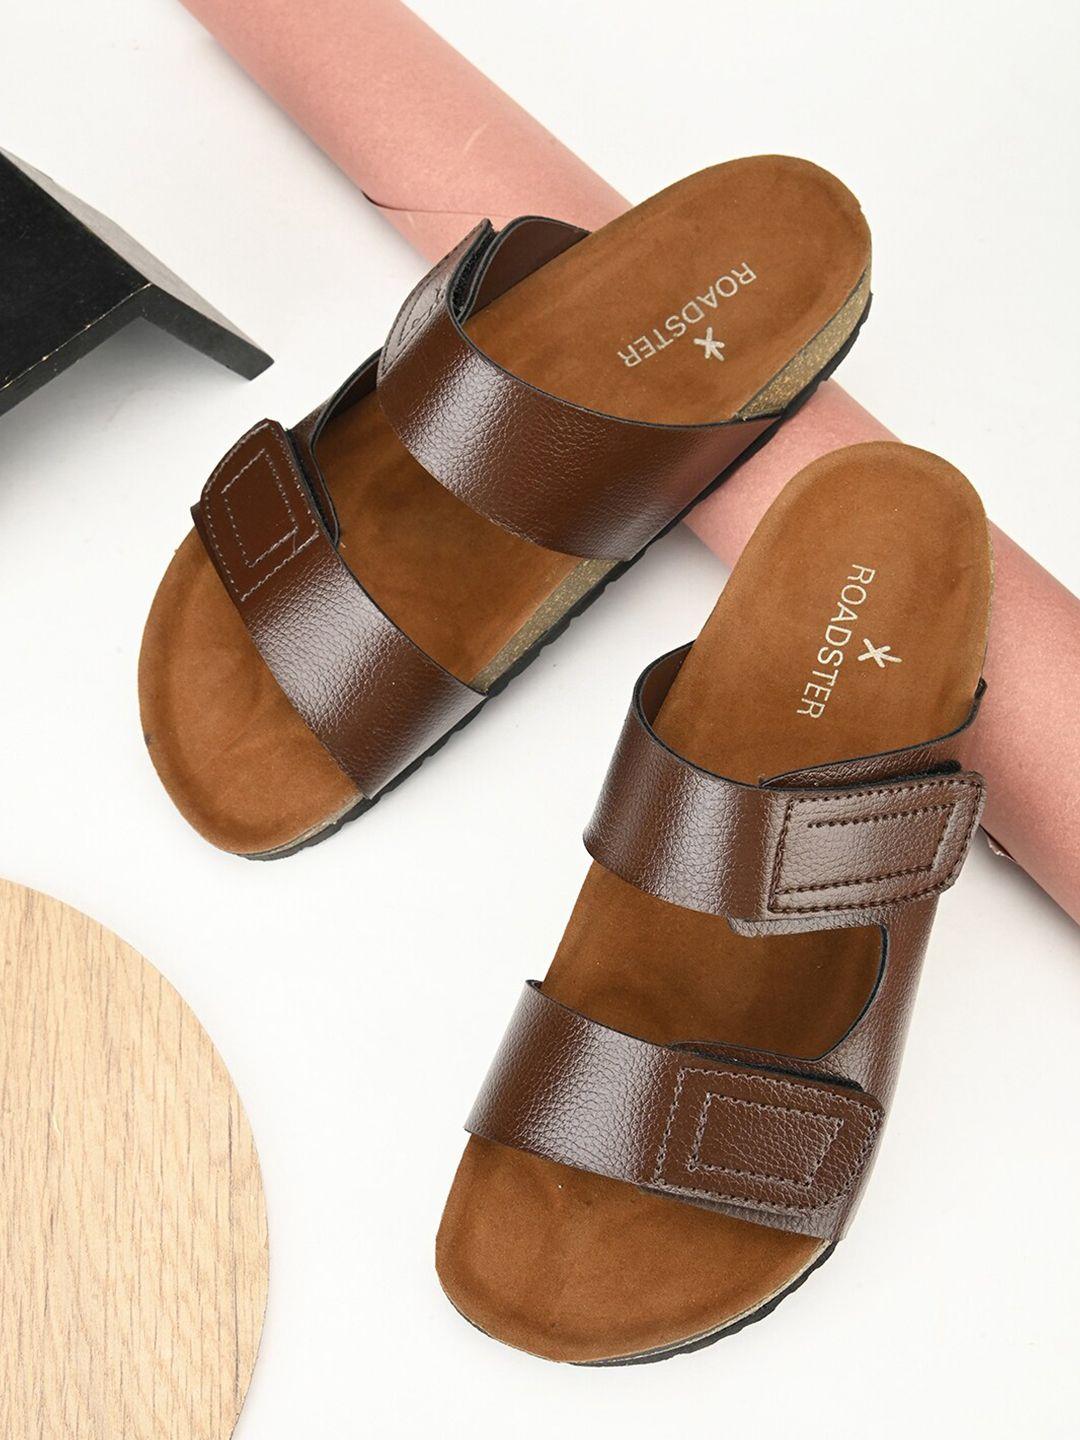 The Roadster Lifestyle Co. Brown Slip-On Comfort Sandals